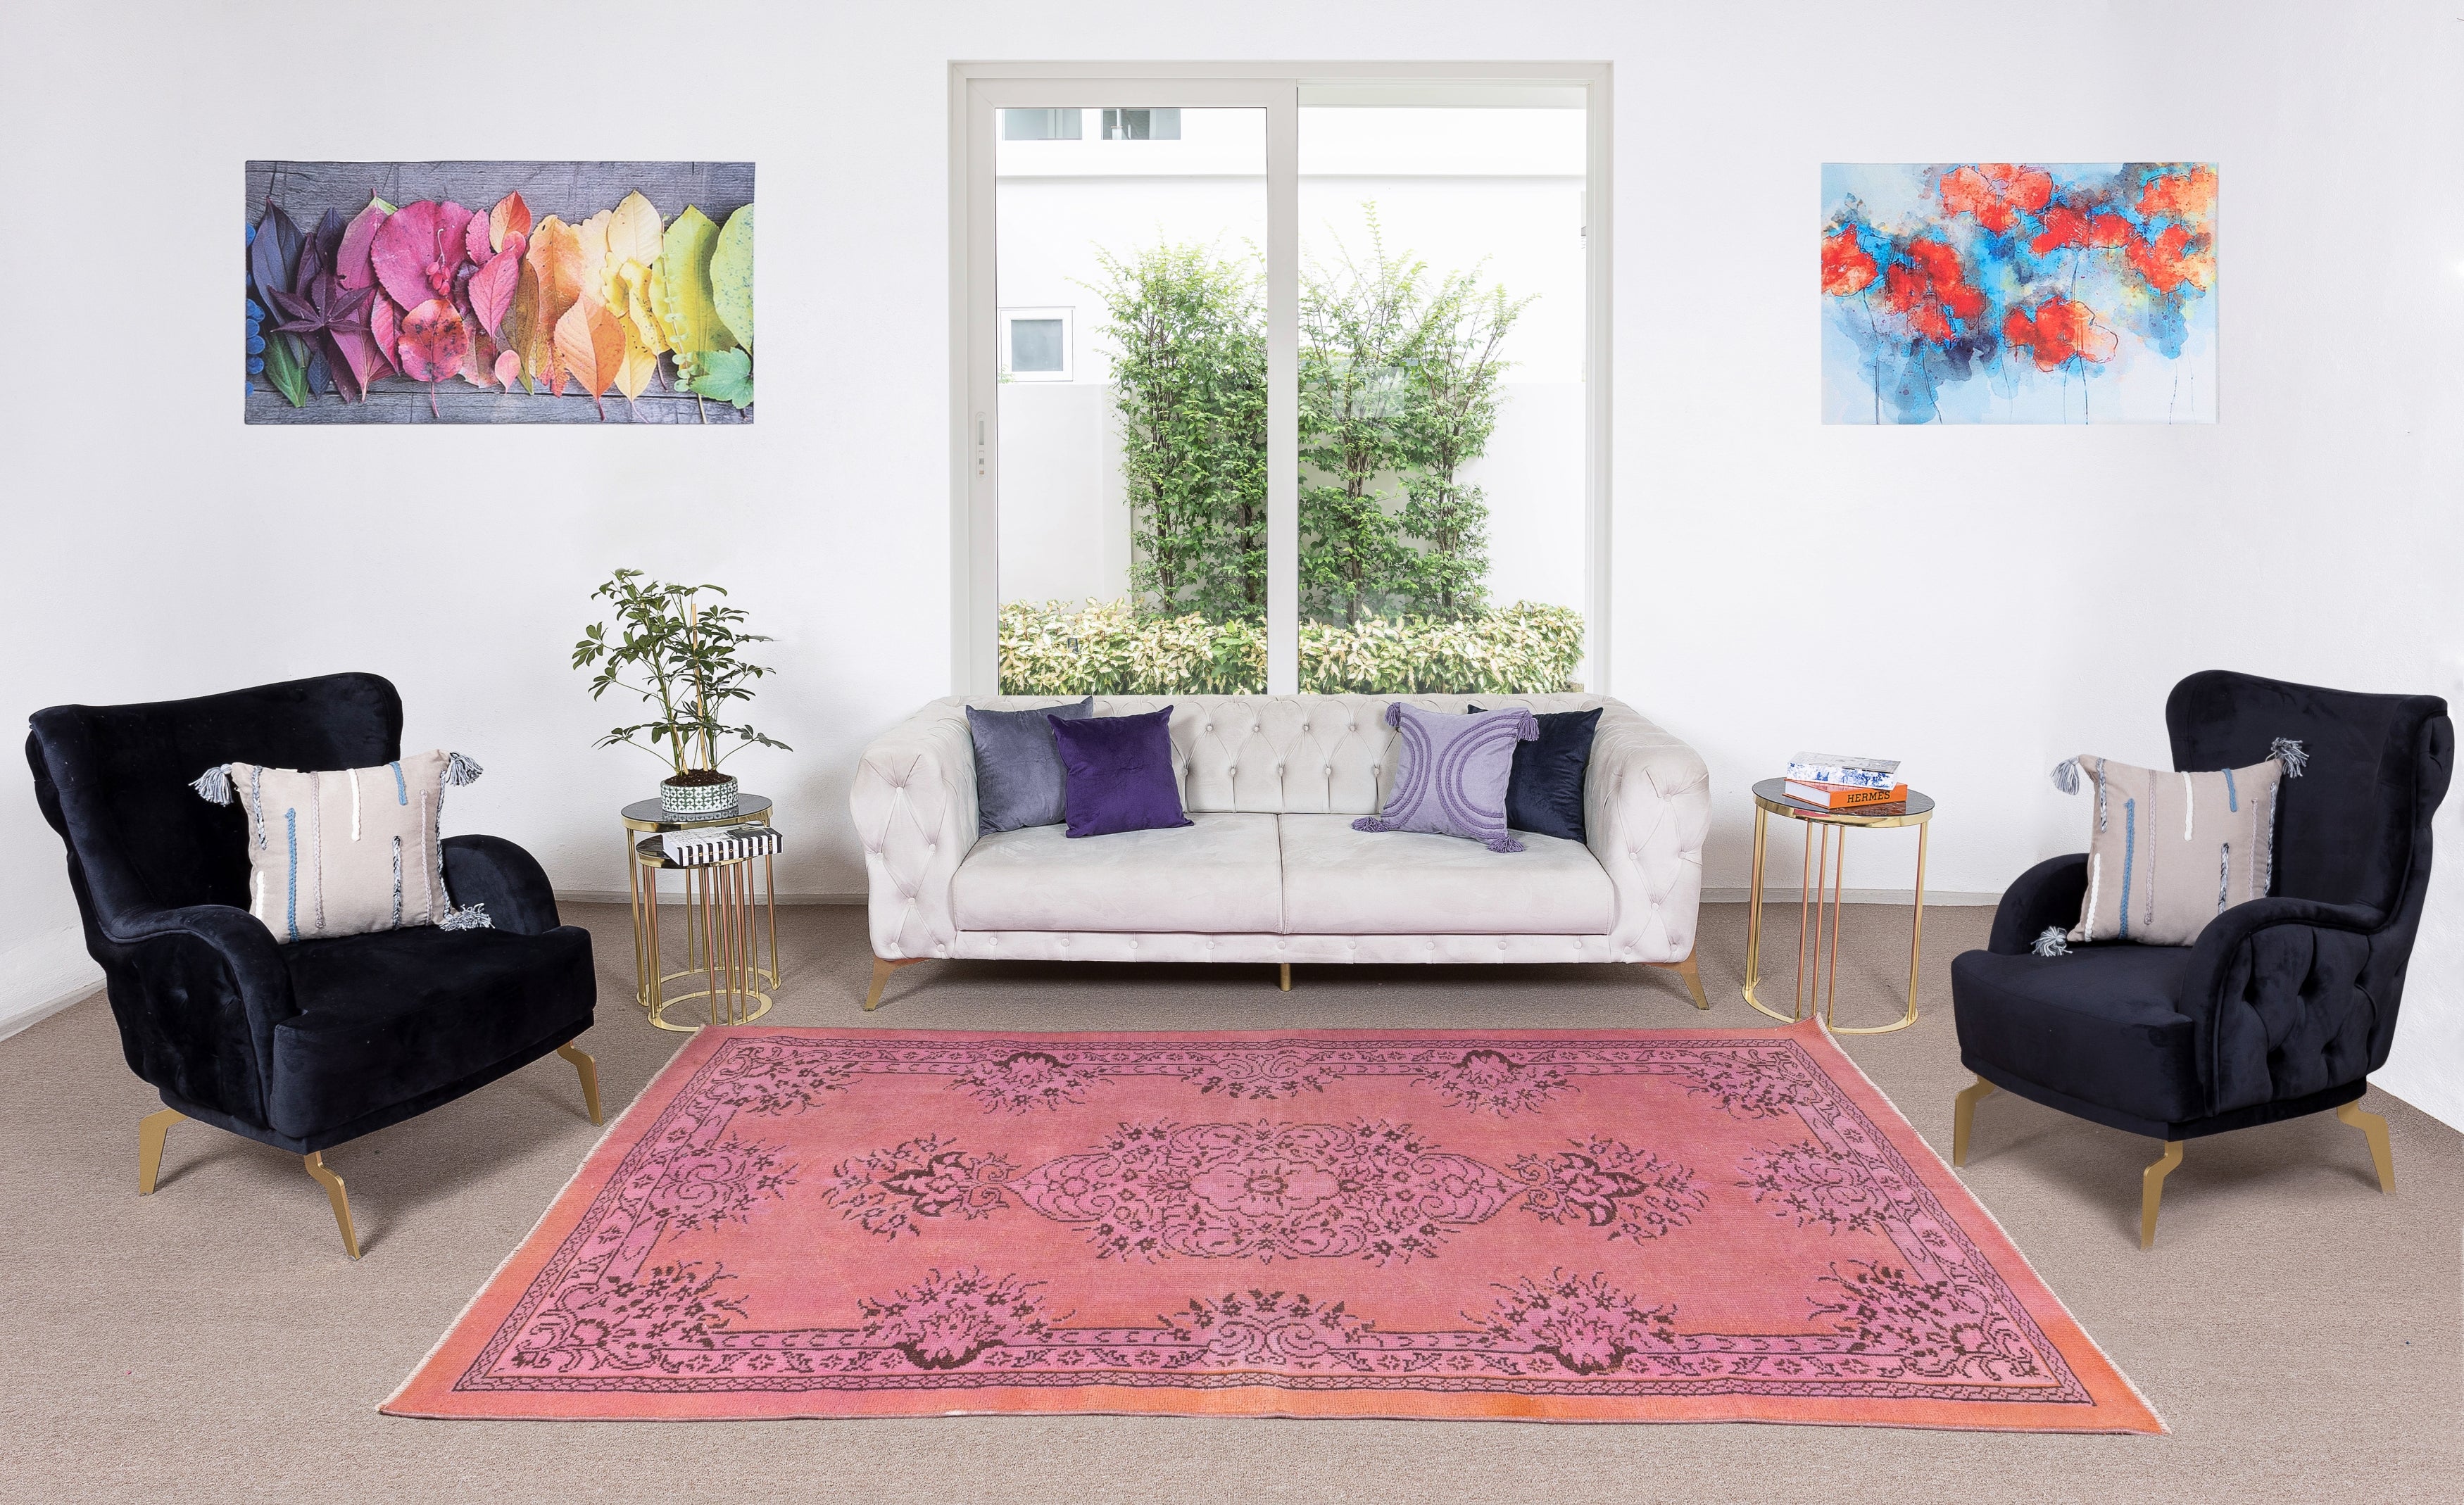 5.6x9 Ft Pink Living Room Decor Rug. Contemporary Handmade Turkish Wool Carpet For Sale